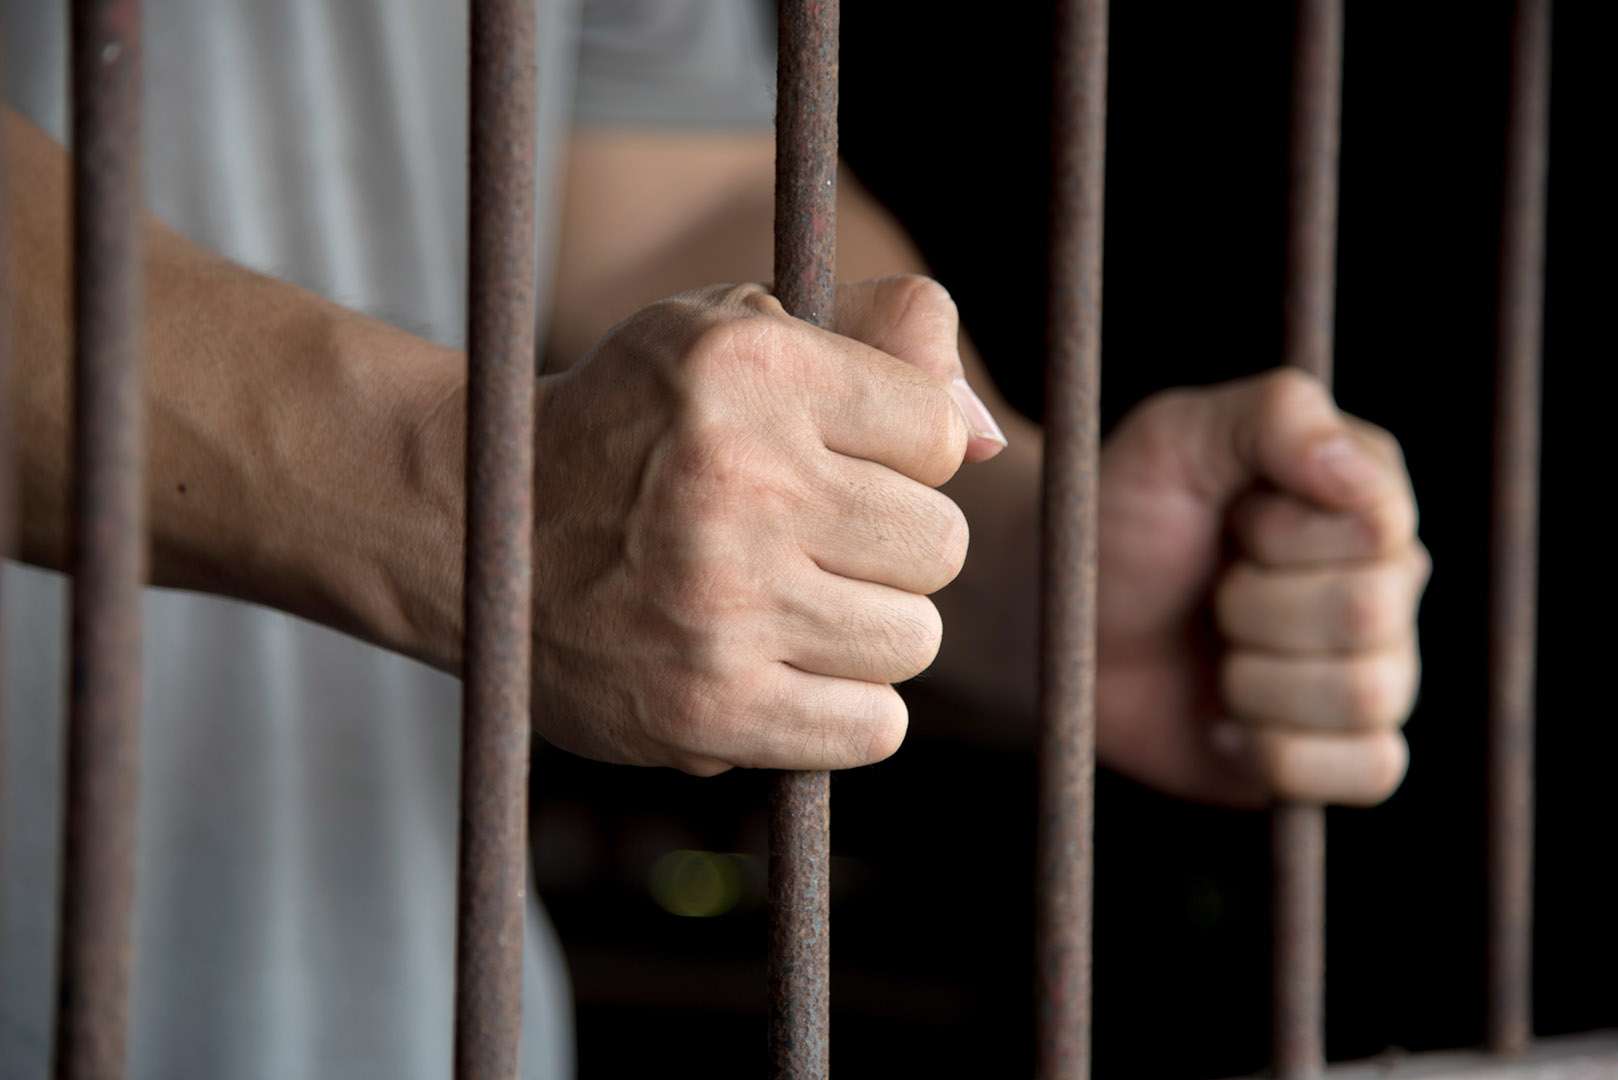 Reduce overcrowding in prisons to prevent radicalisation, urge MEPs ...